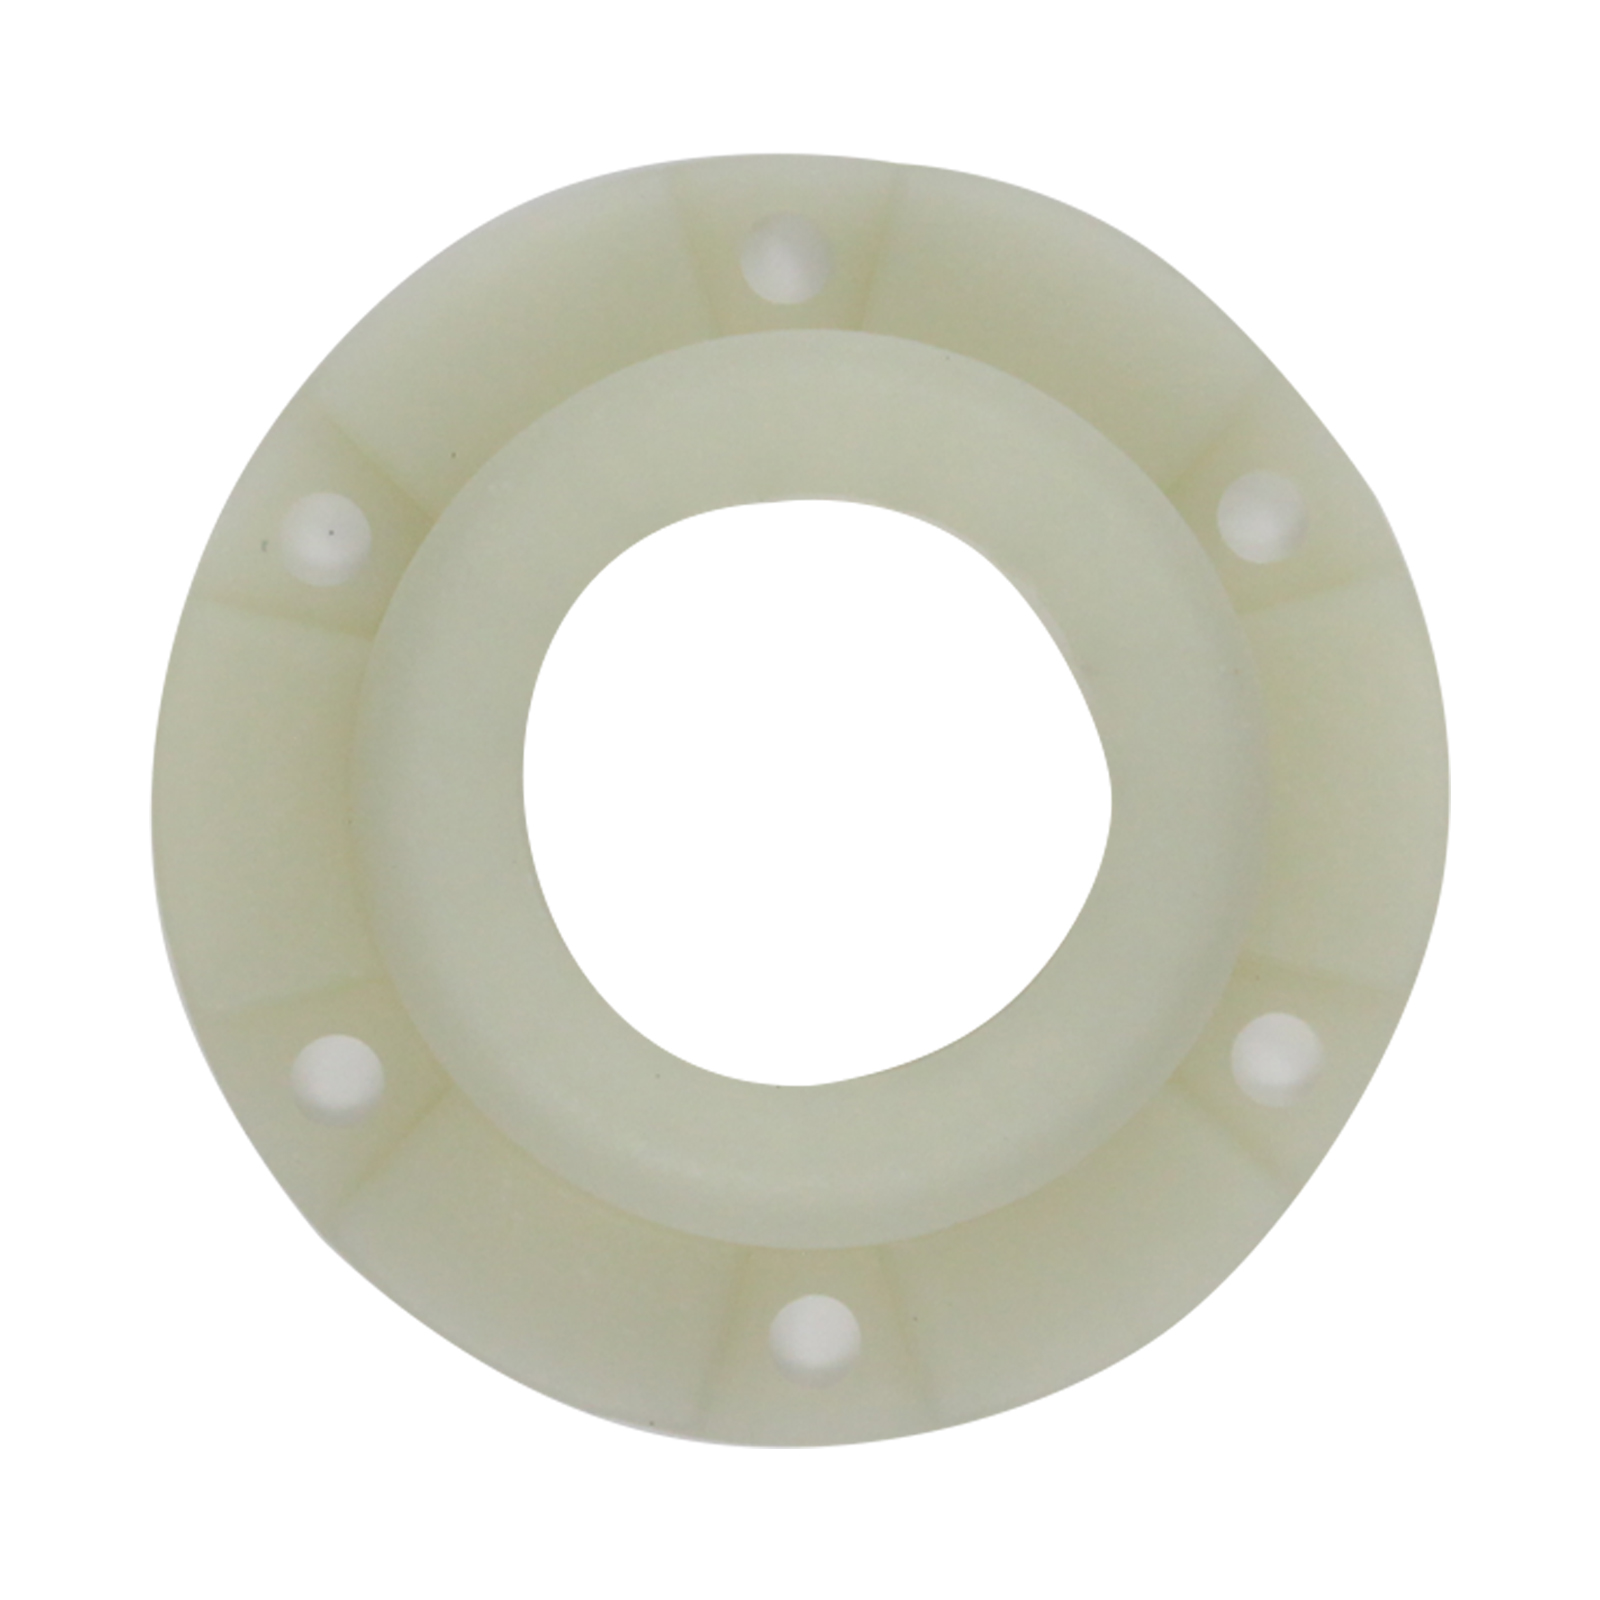 W10820039 Hub Kit Replacement for Whirlpool WTW6400SW2 Washer - Compatible with 280145 Basket Hub Kit - UpStart Components Brand - image 3 of 4